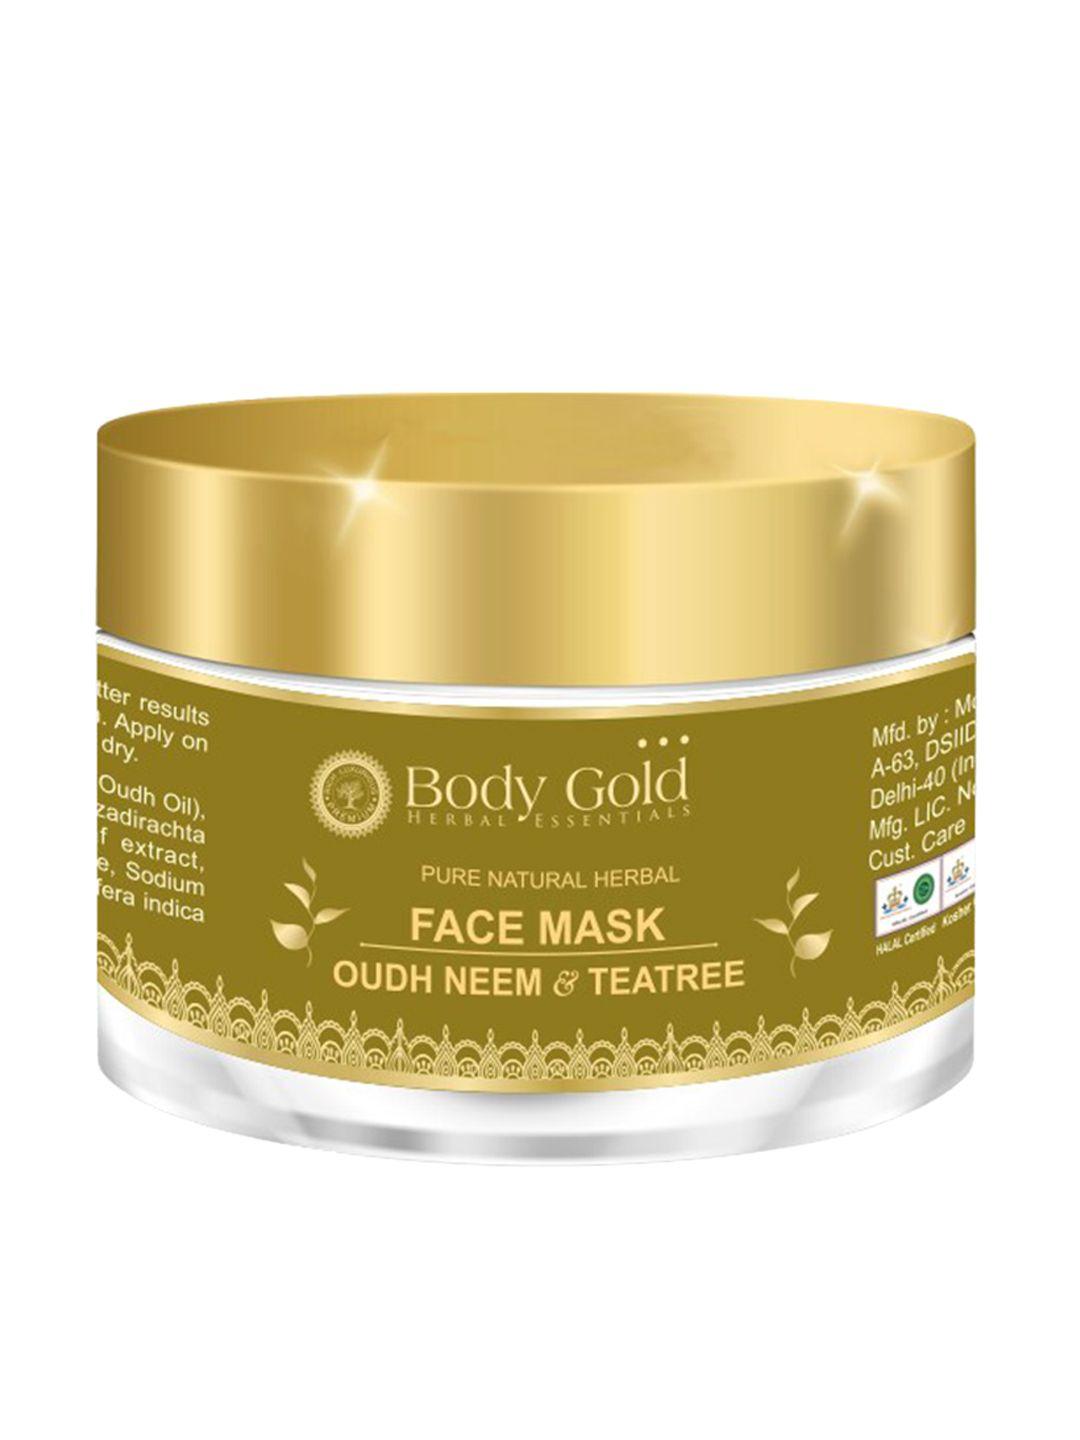 body gold pure natural herbal face mask with oudh neem & teatree - 60gm